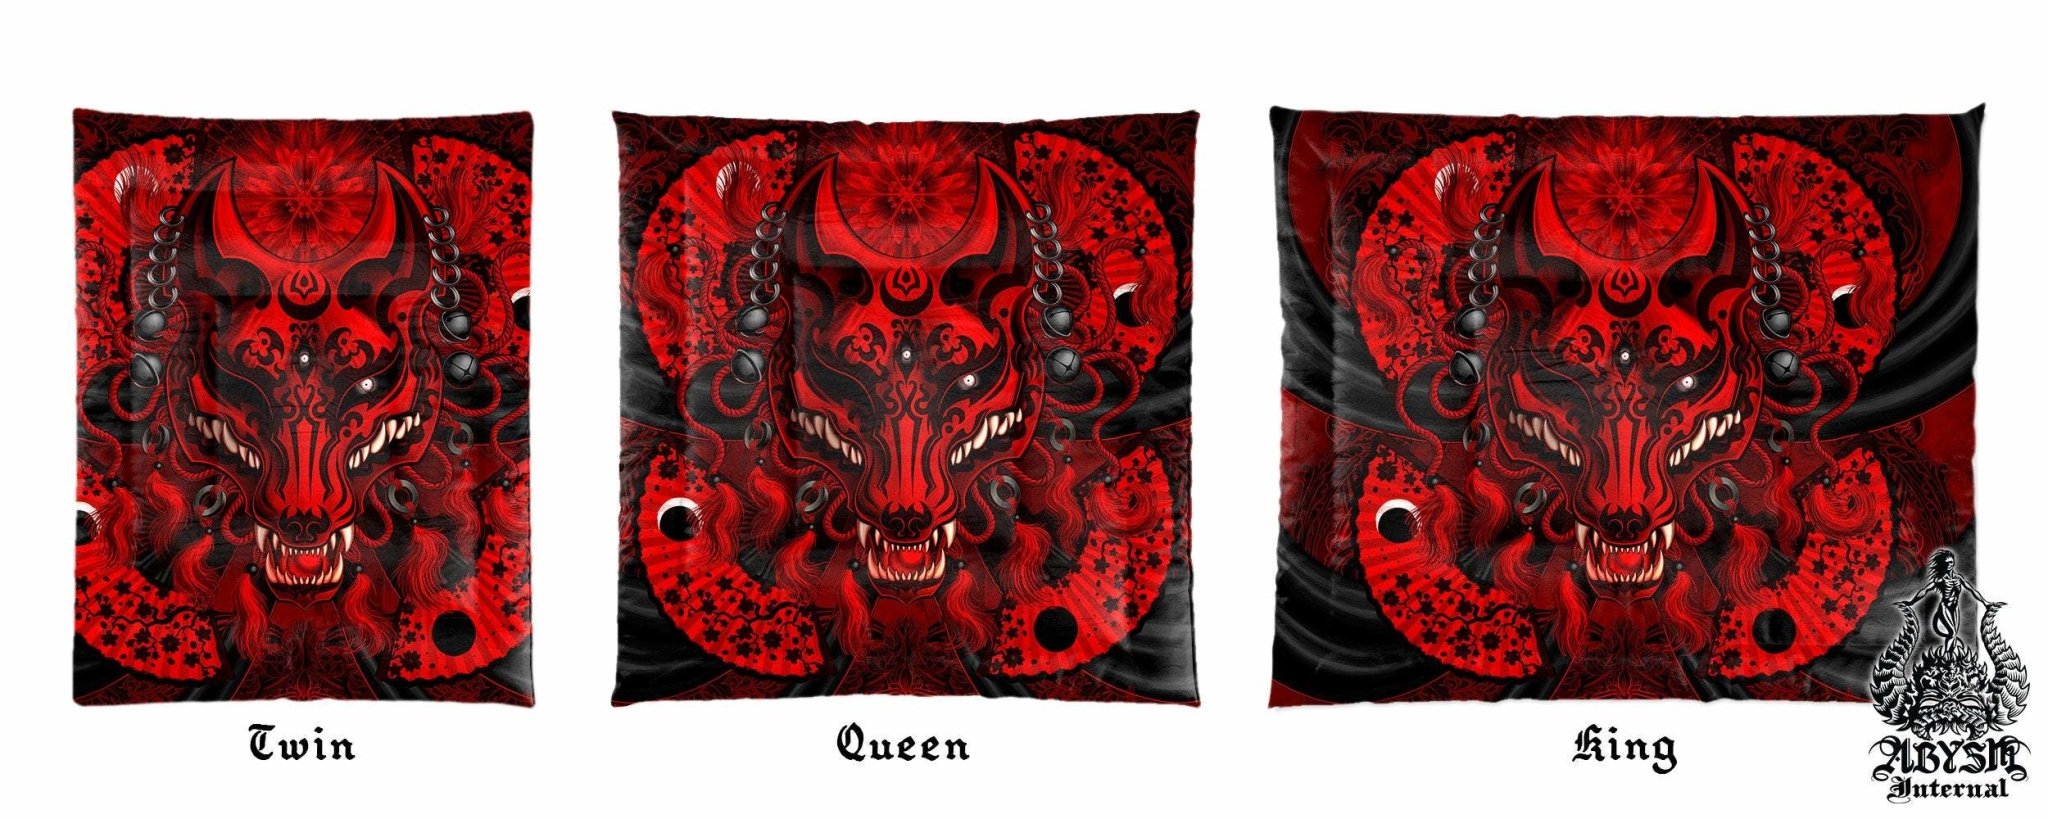 Kitsune Mask Bedding Set, Comforter and Duvet, Gamer Bed Cover and Bedroom Decor, Fox Okami, Anime Art, King, Queen and Twin Size - Bloody Black Gothic - Abysm Internal